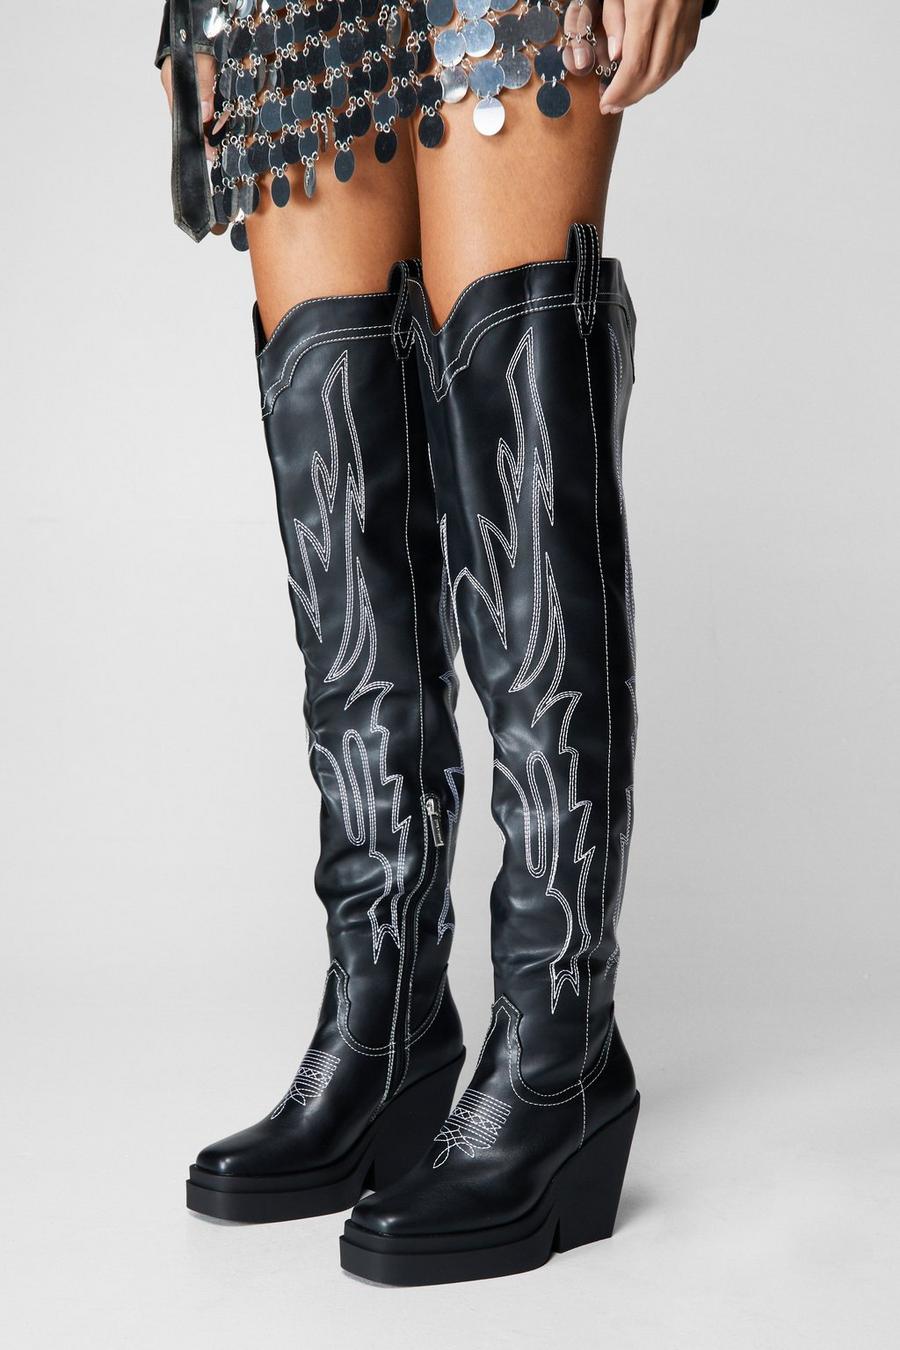 Women's Sexy Black Faux Leather Knee High Boots